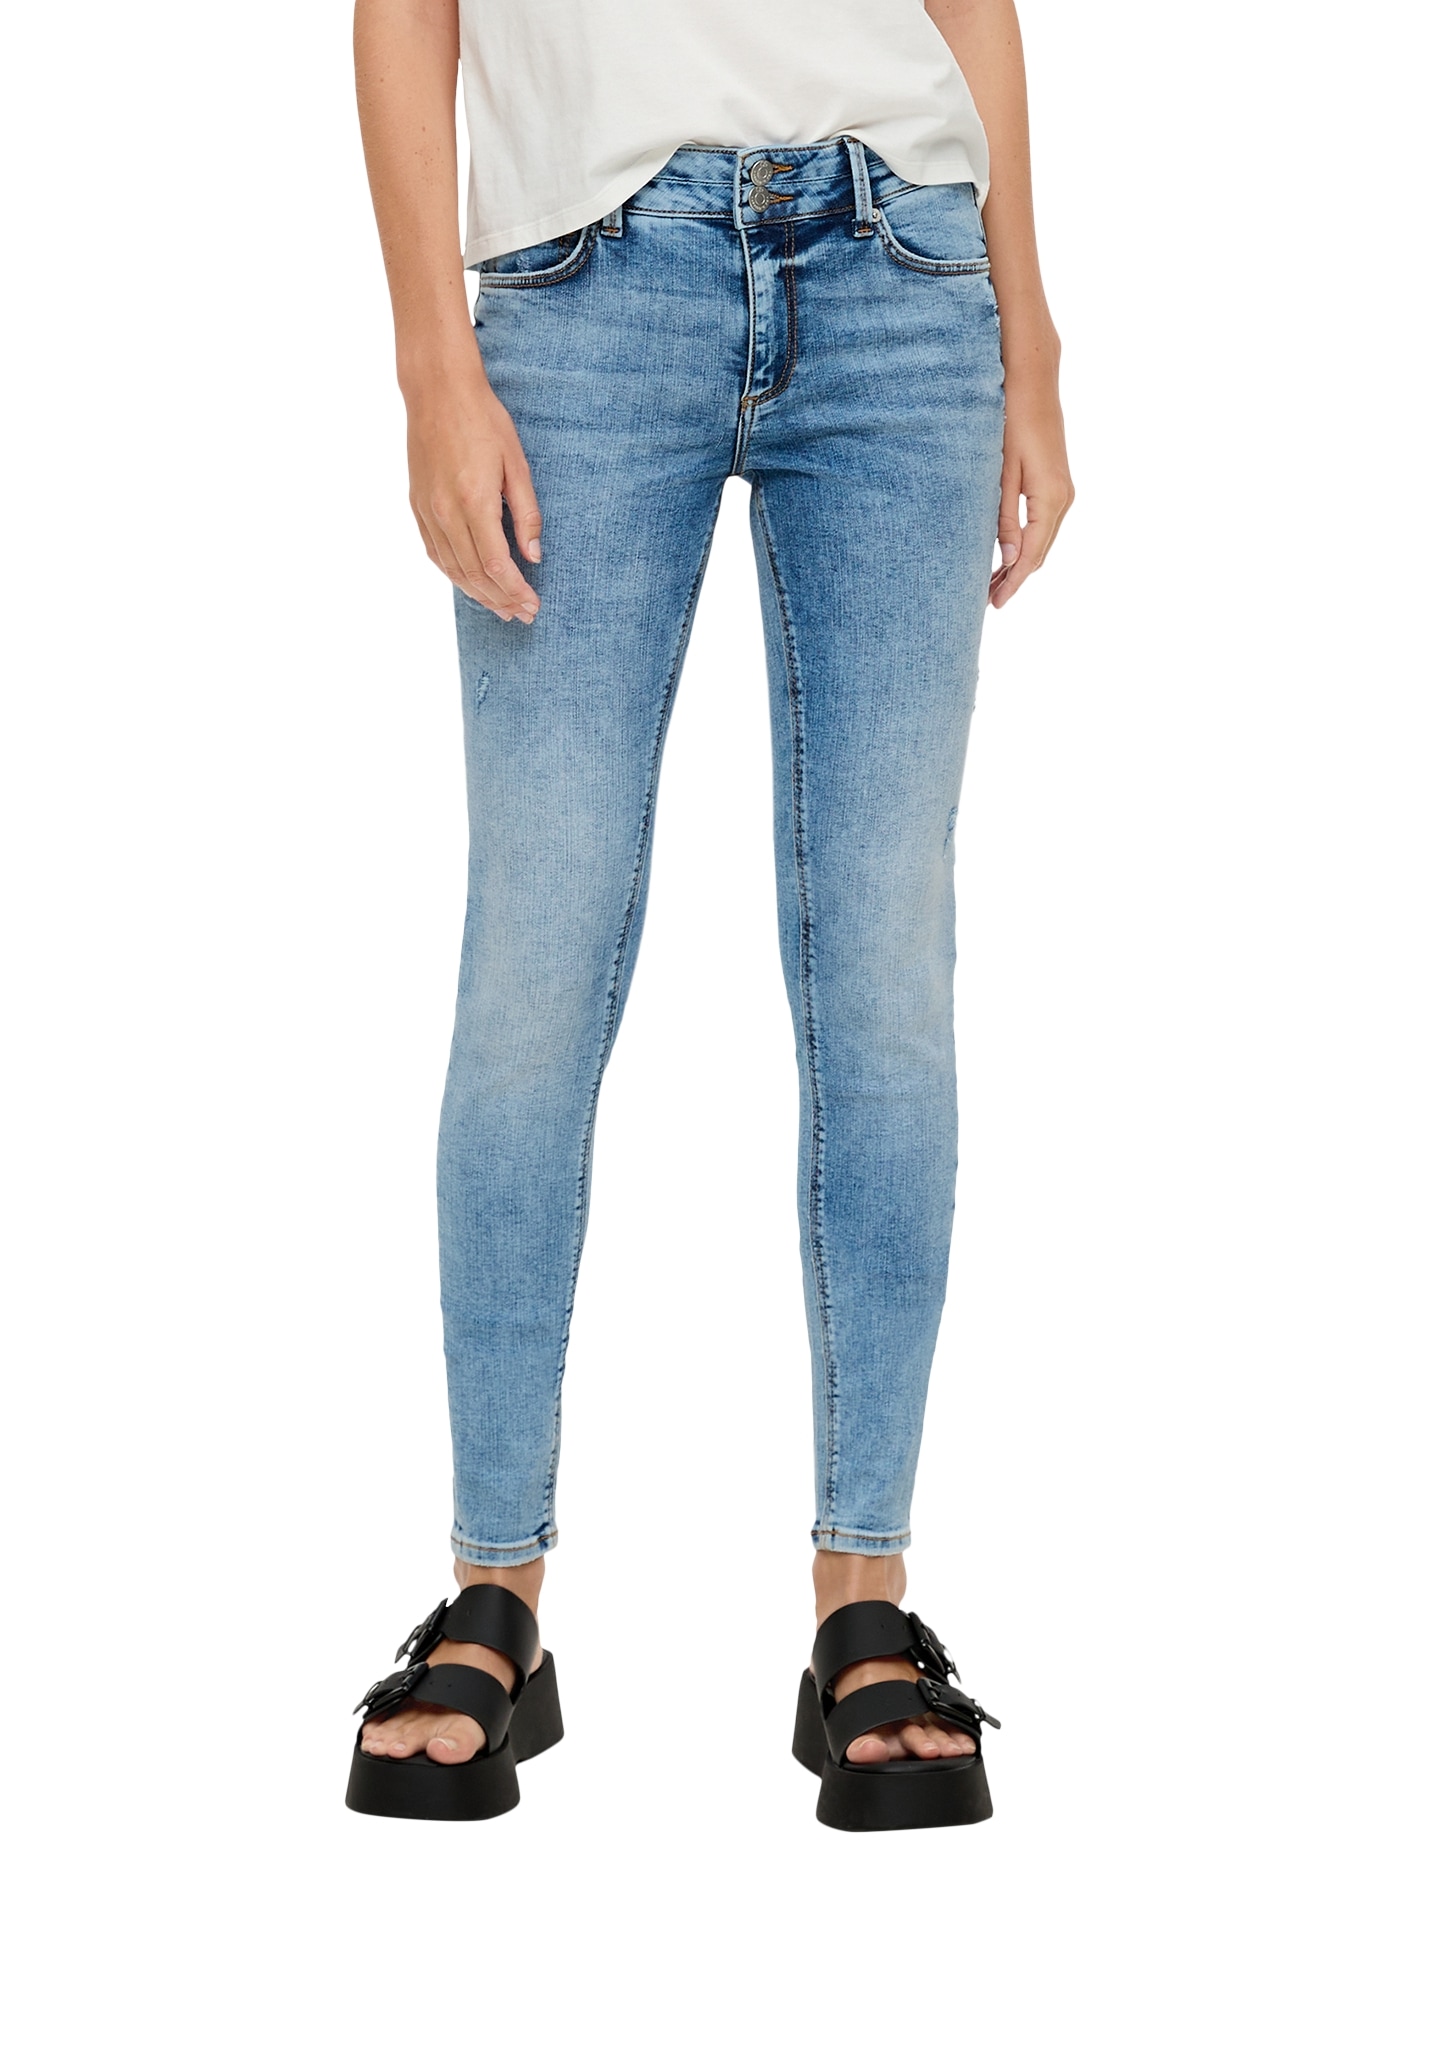 Skinny-fit-Jeans, in hellblauer Waschung